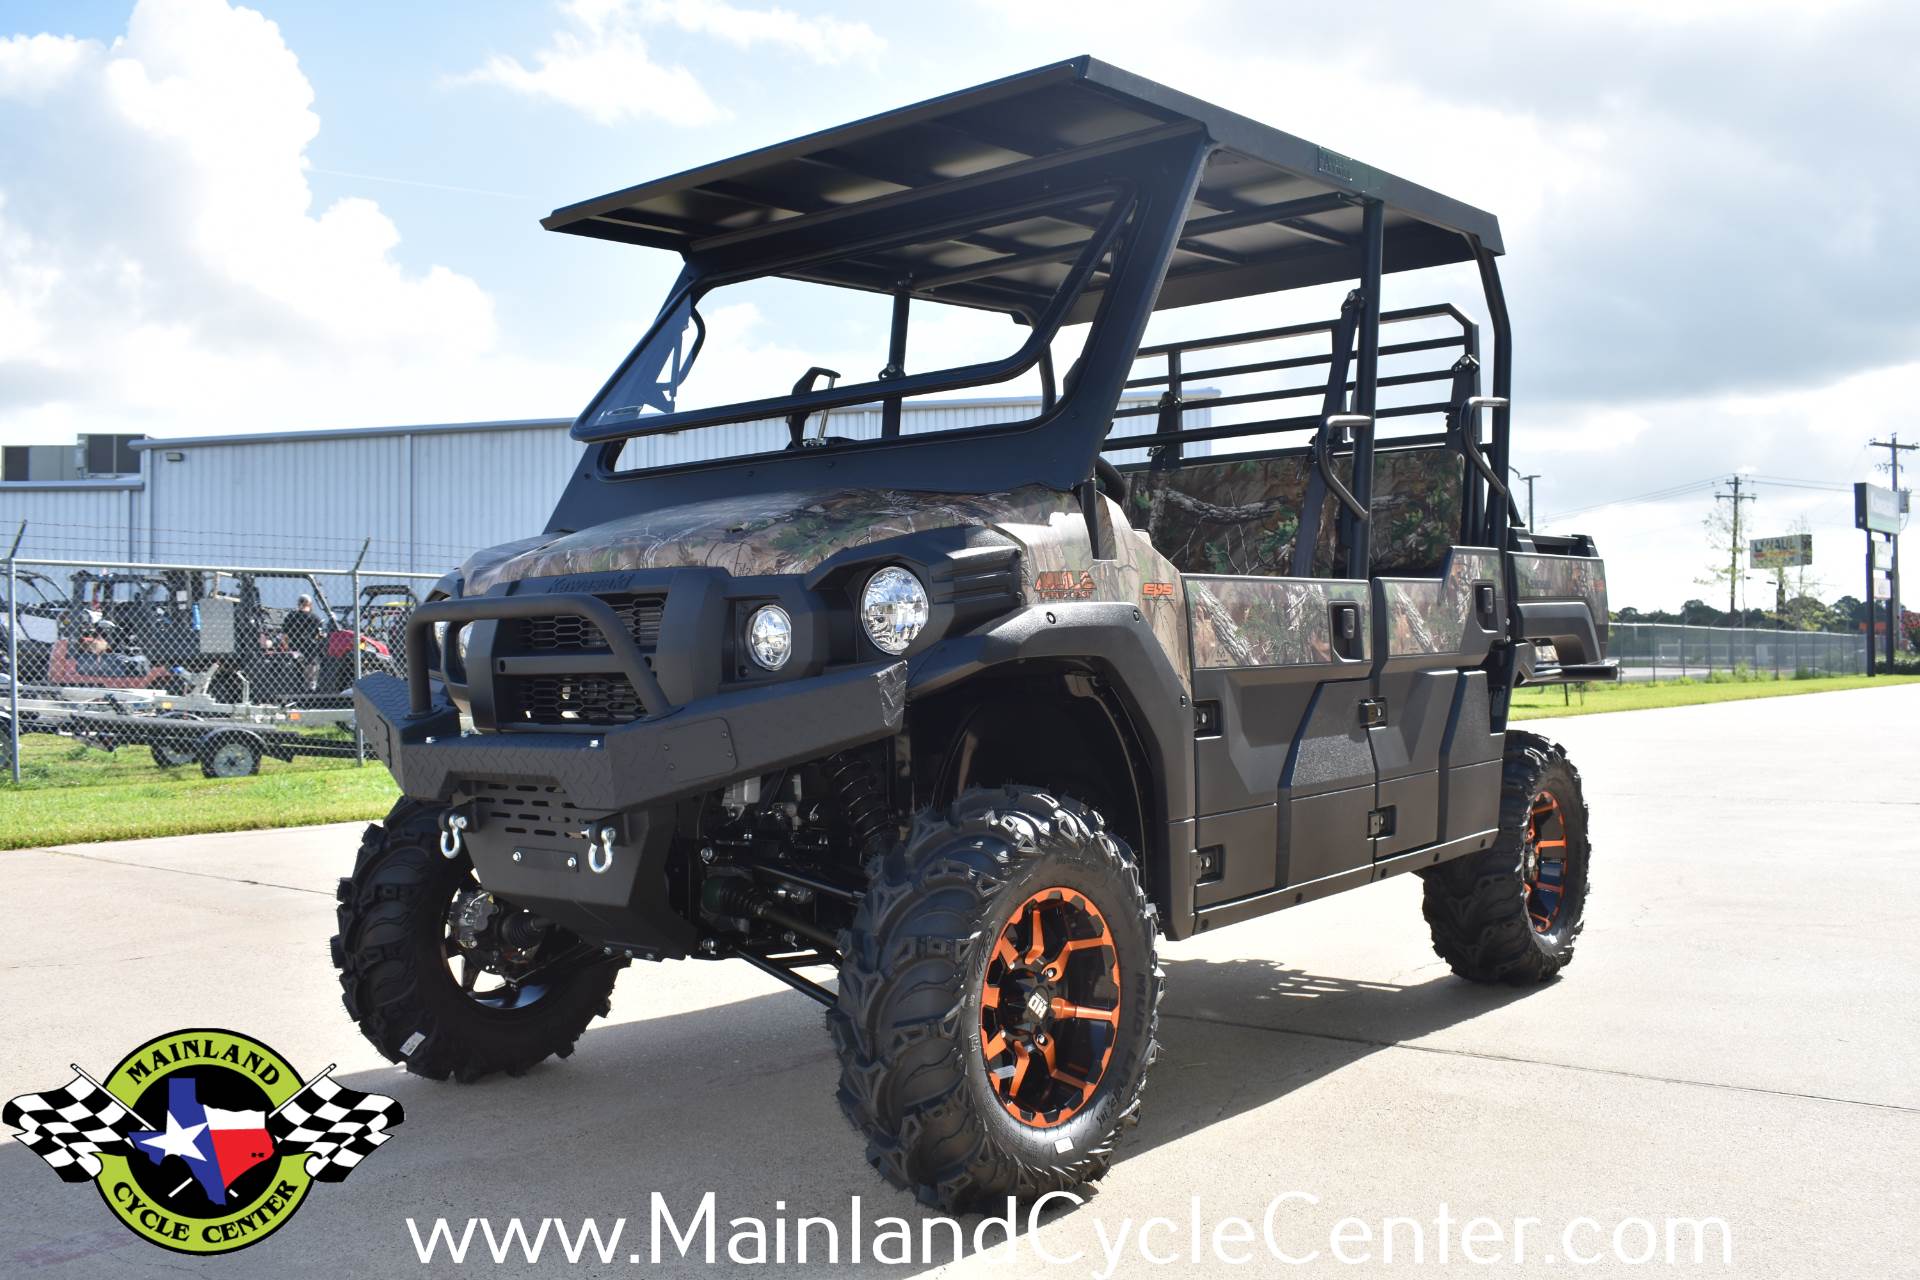 2015-2019 Genuine Kawasaki Mule PRO-FXT DXT Soft Top Roof and Rear Panel Camo 